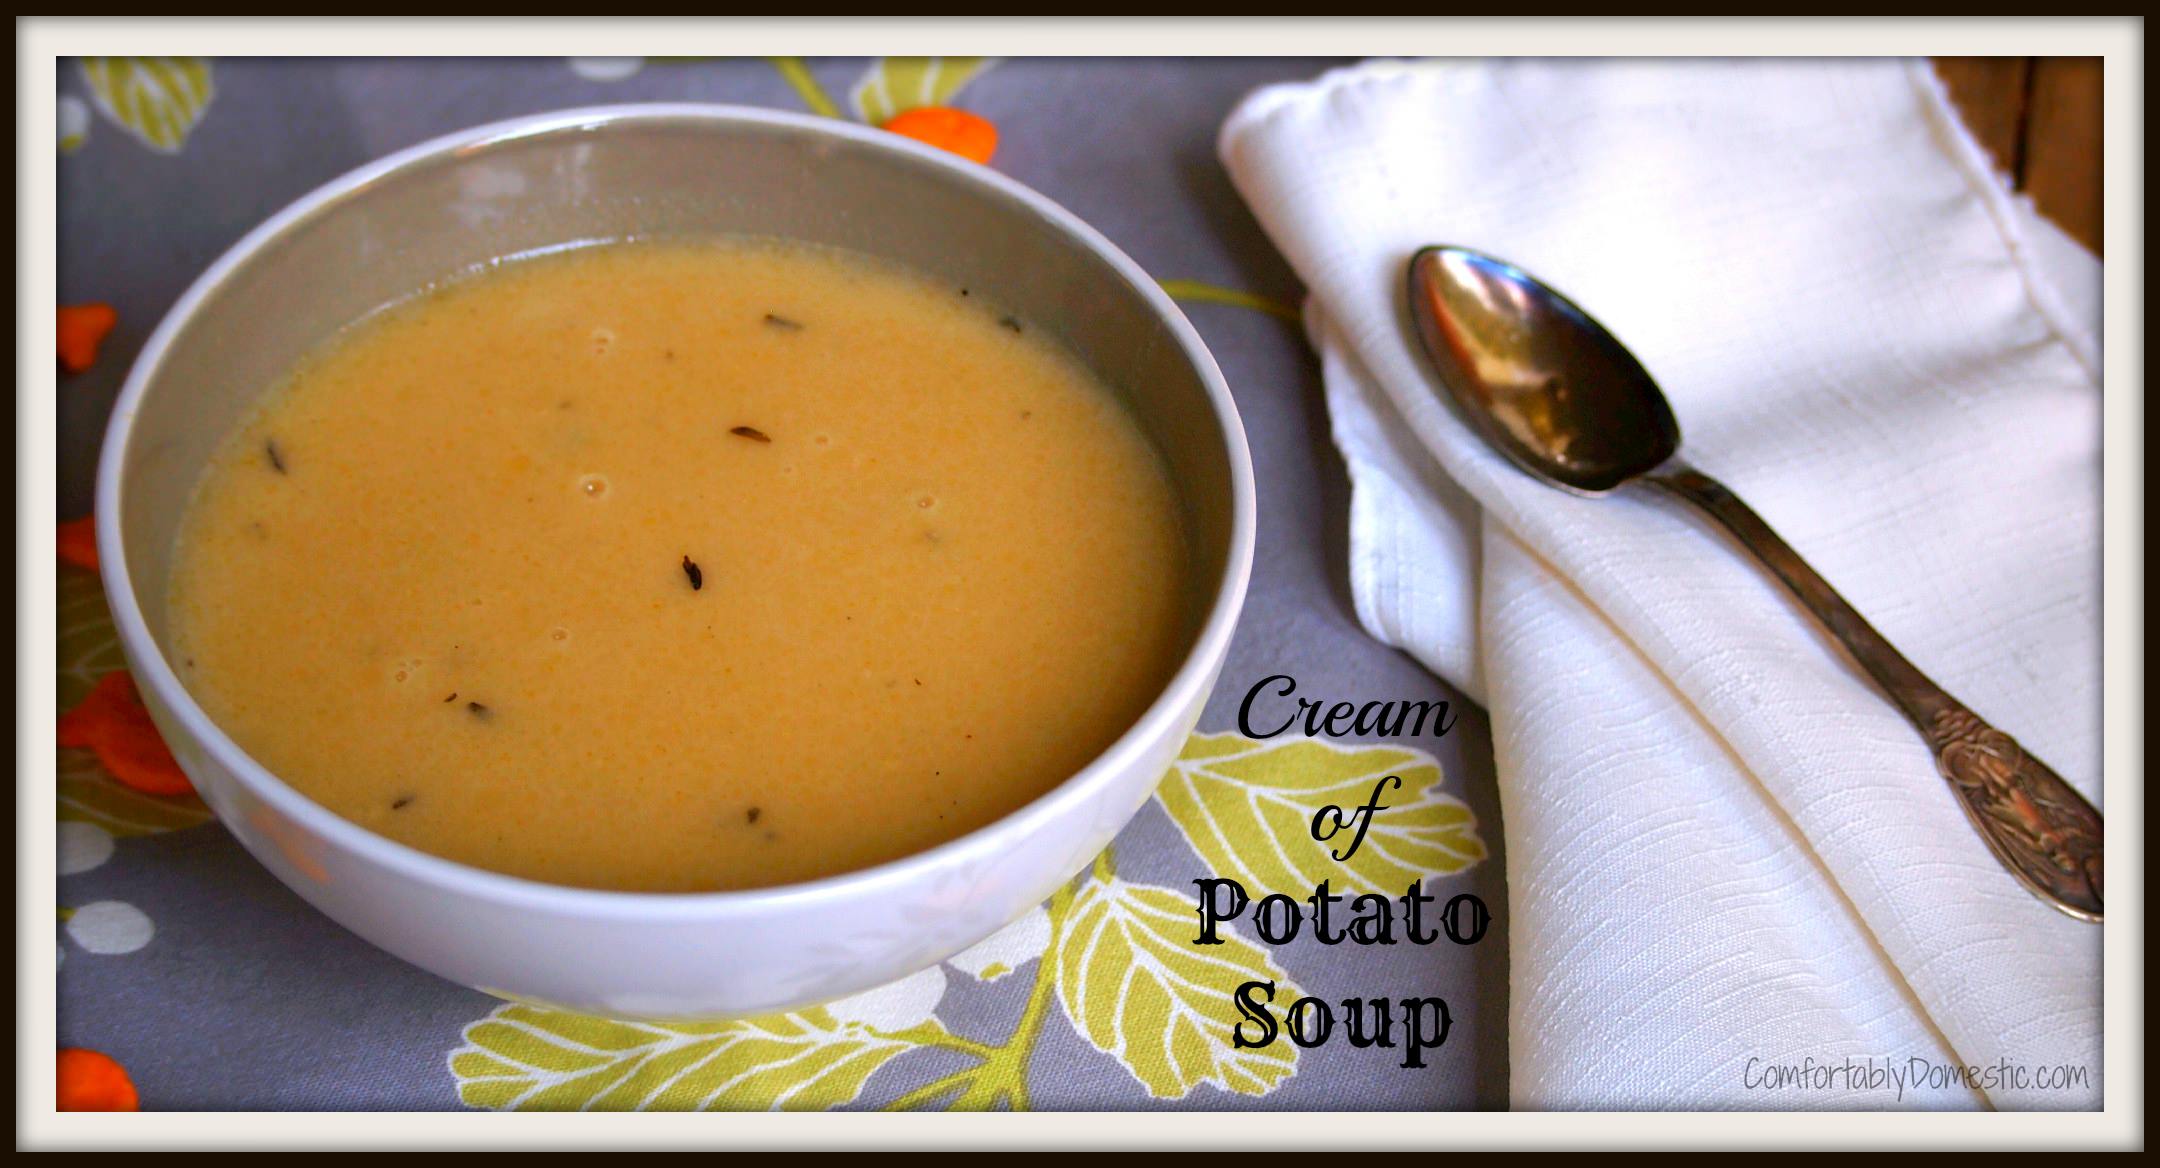 Cream of potato soup is a smooth, creamy potato soup with nice big chunks of potatoes. It's ready in about the time as it takes to prepare a canned soup, but tastes so much better.  | ComfortablyDomestic.com